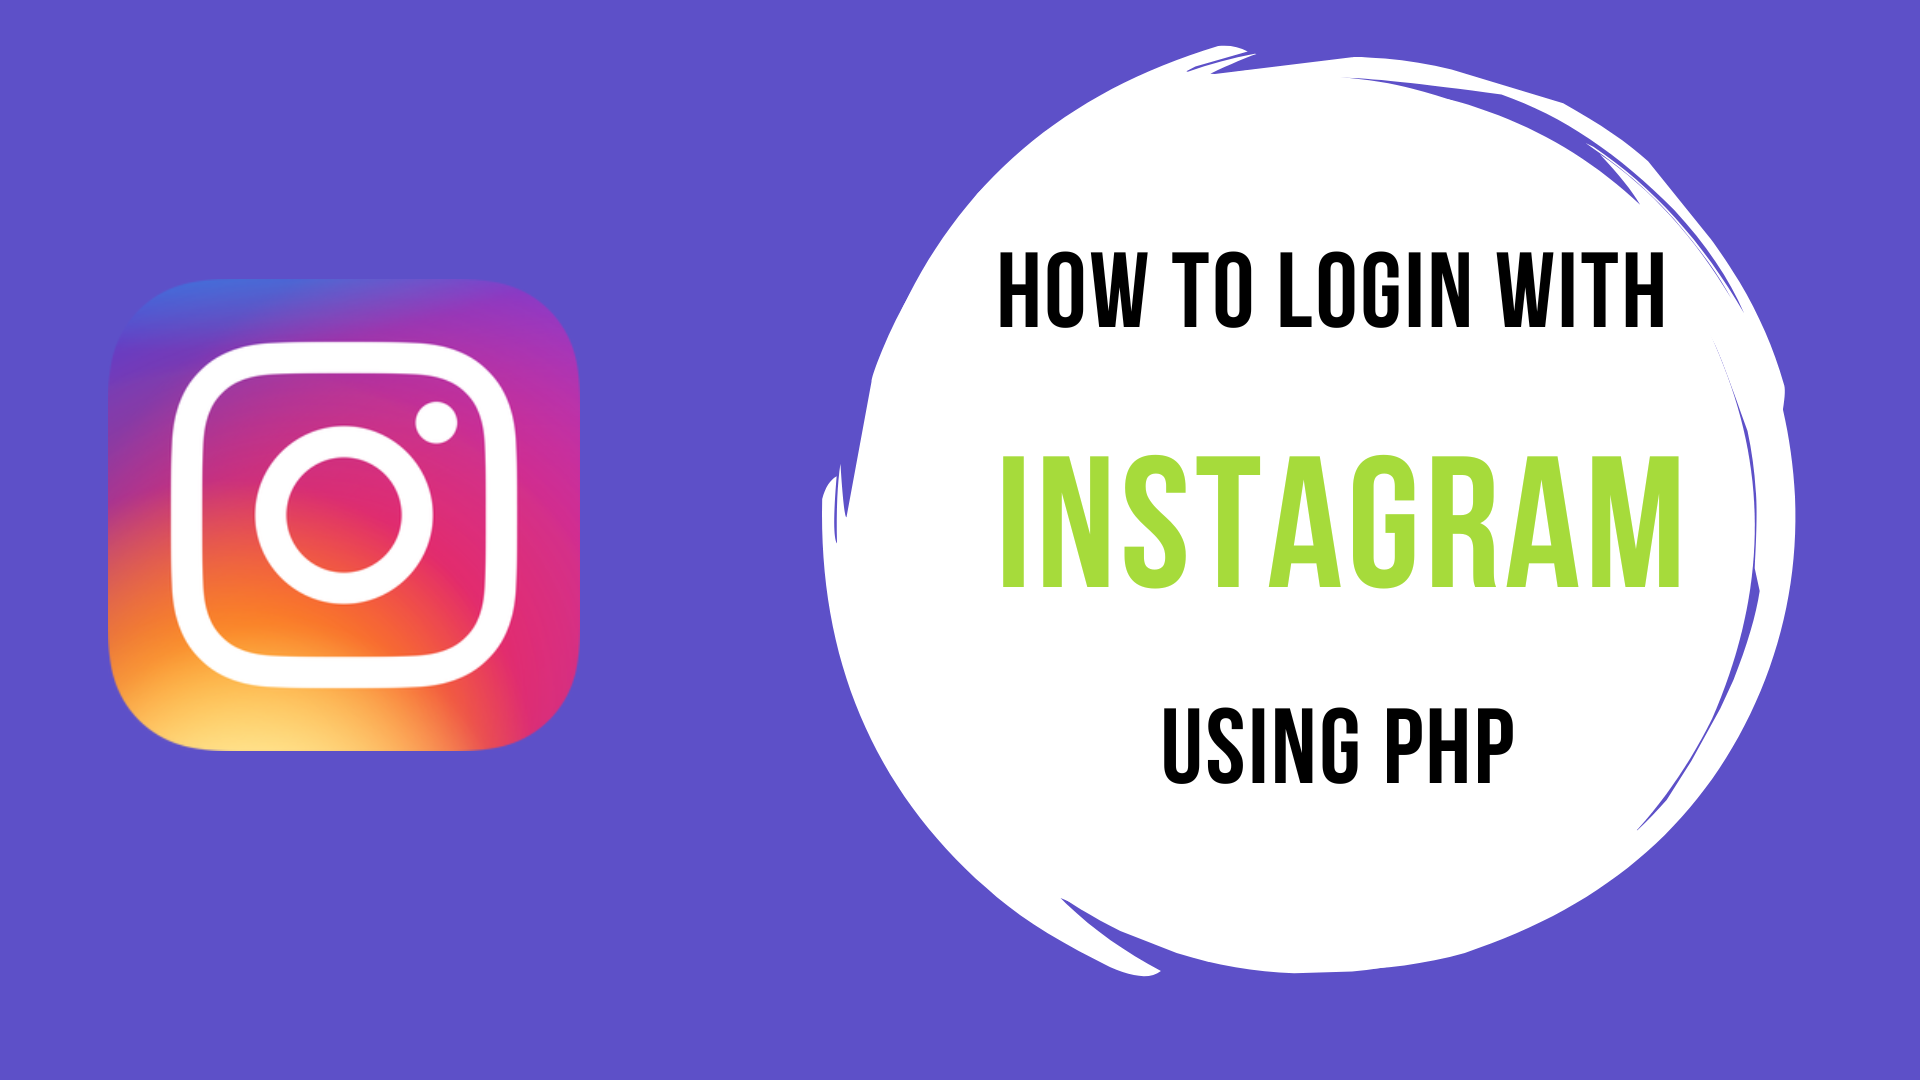 How to login with Instagram using PHP